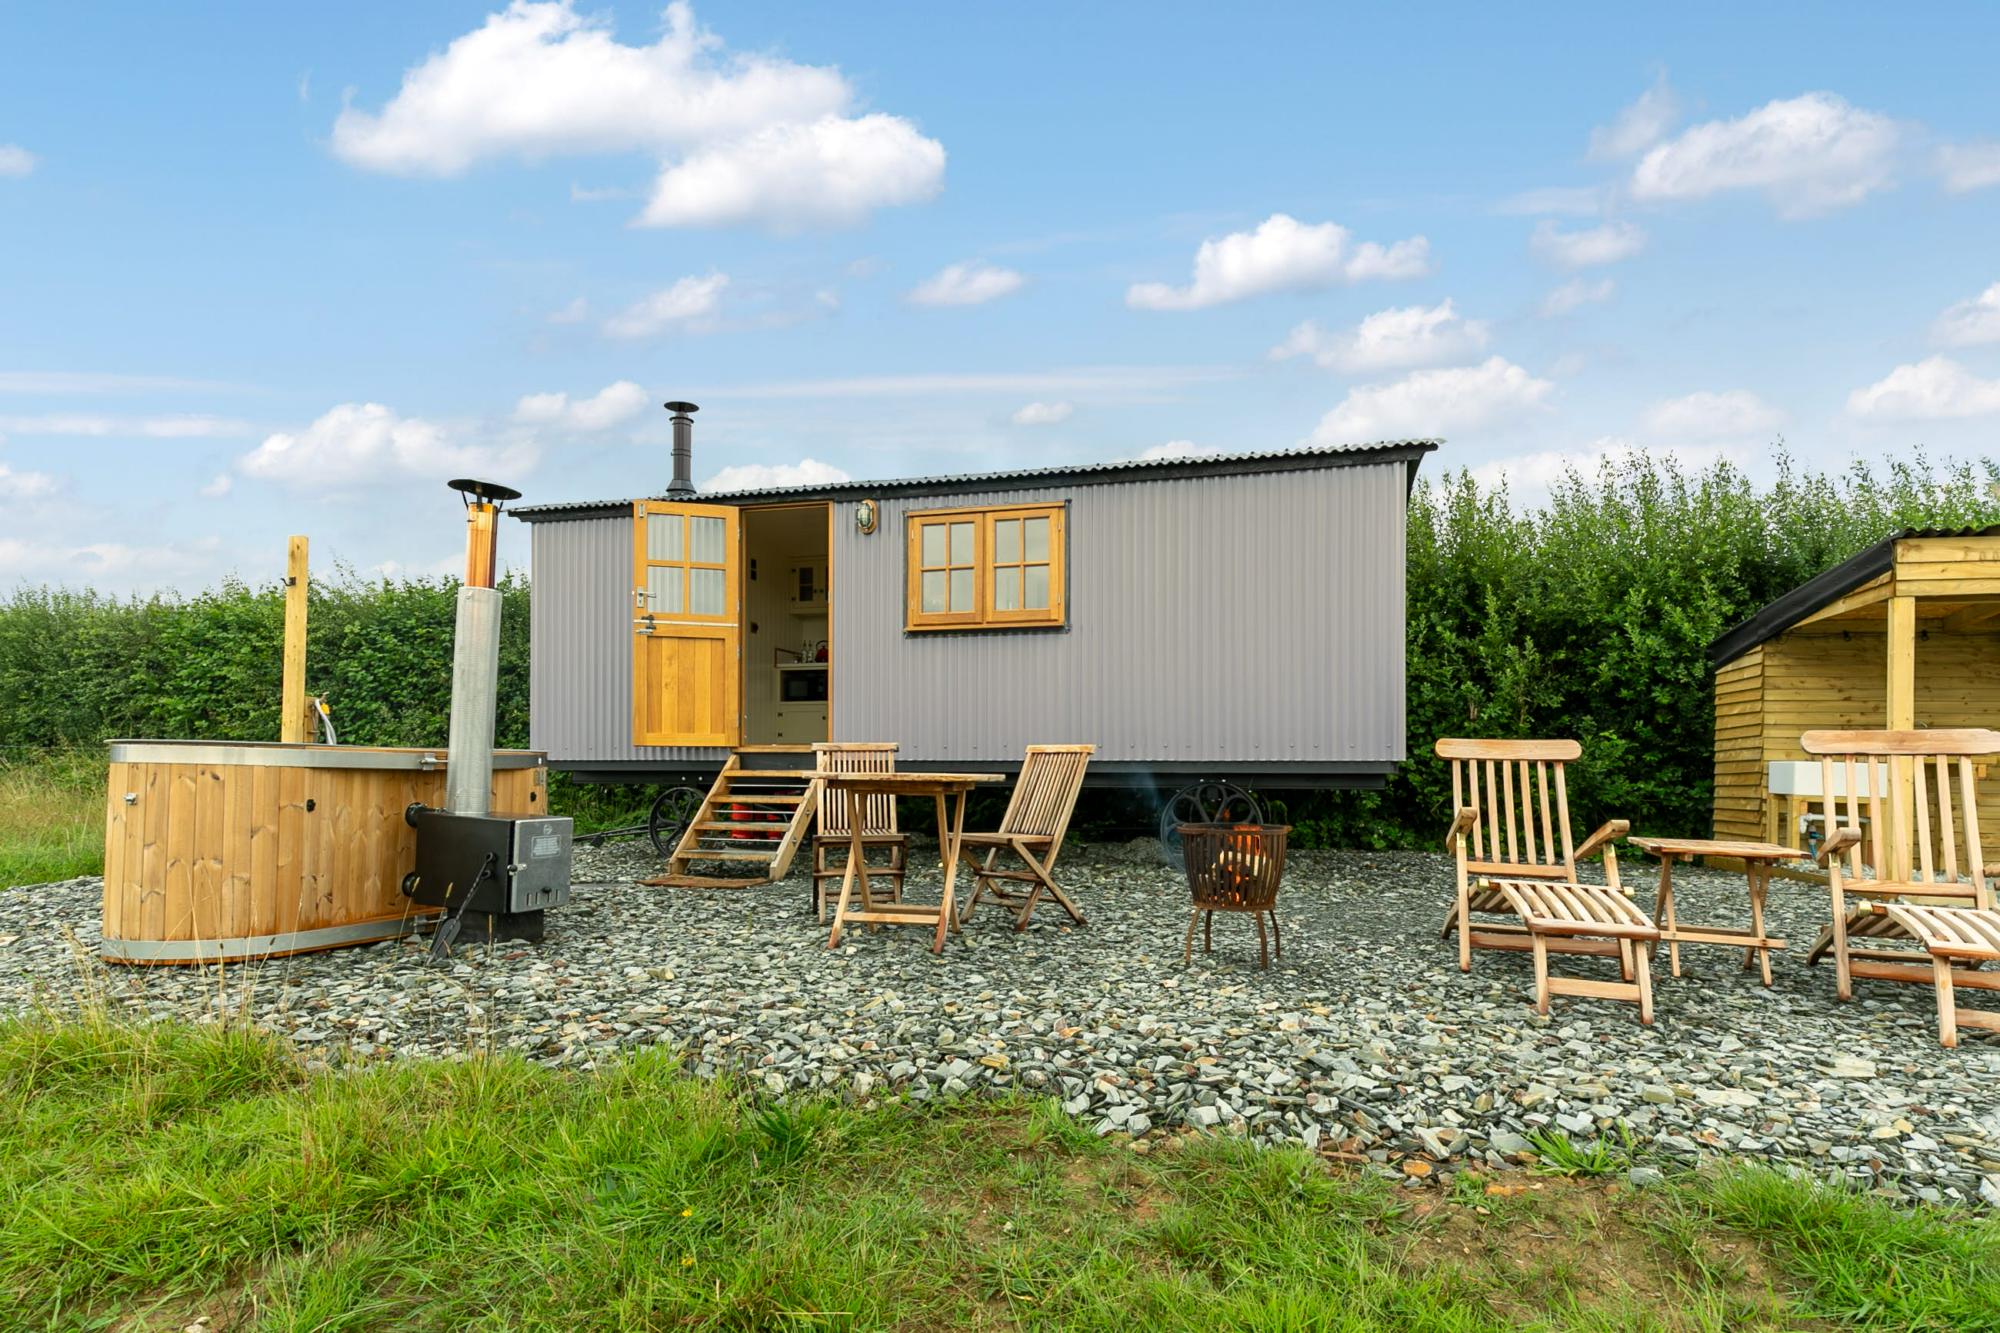 Glamping in South West England holidays at Cool Places